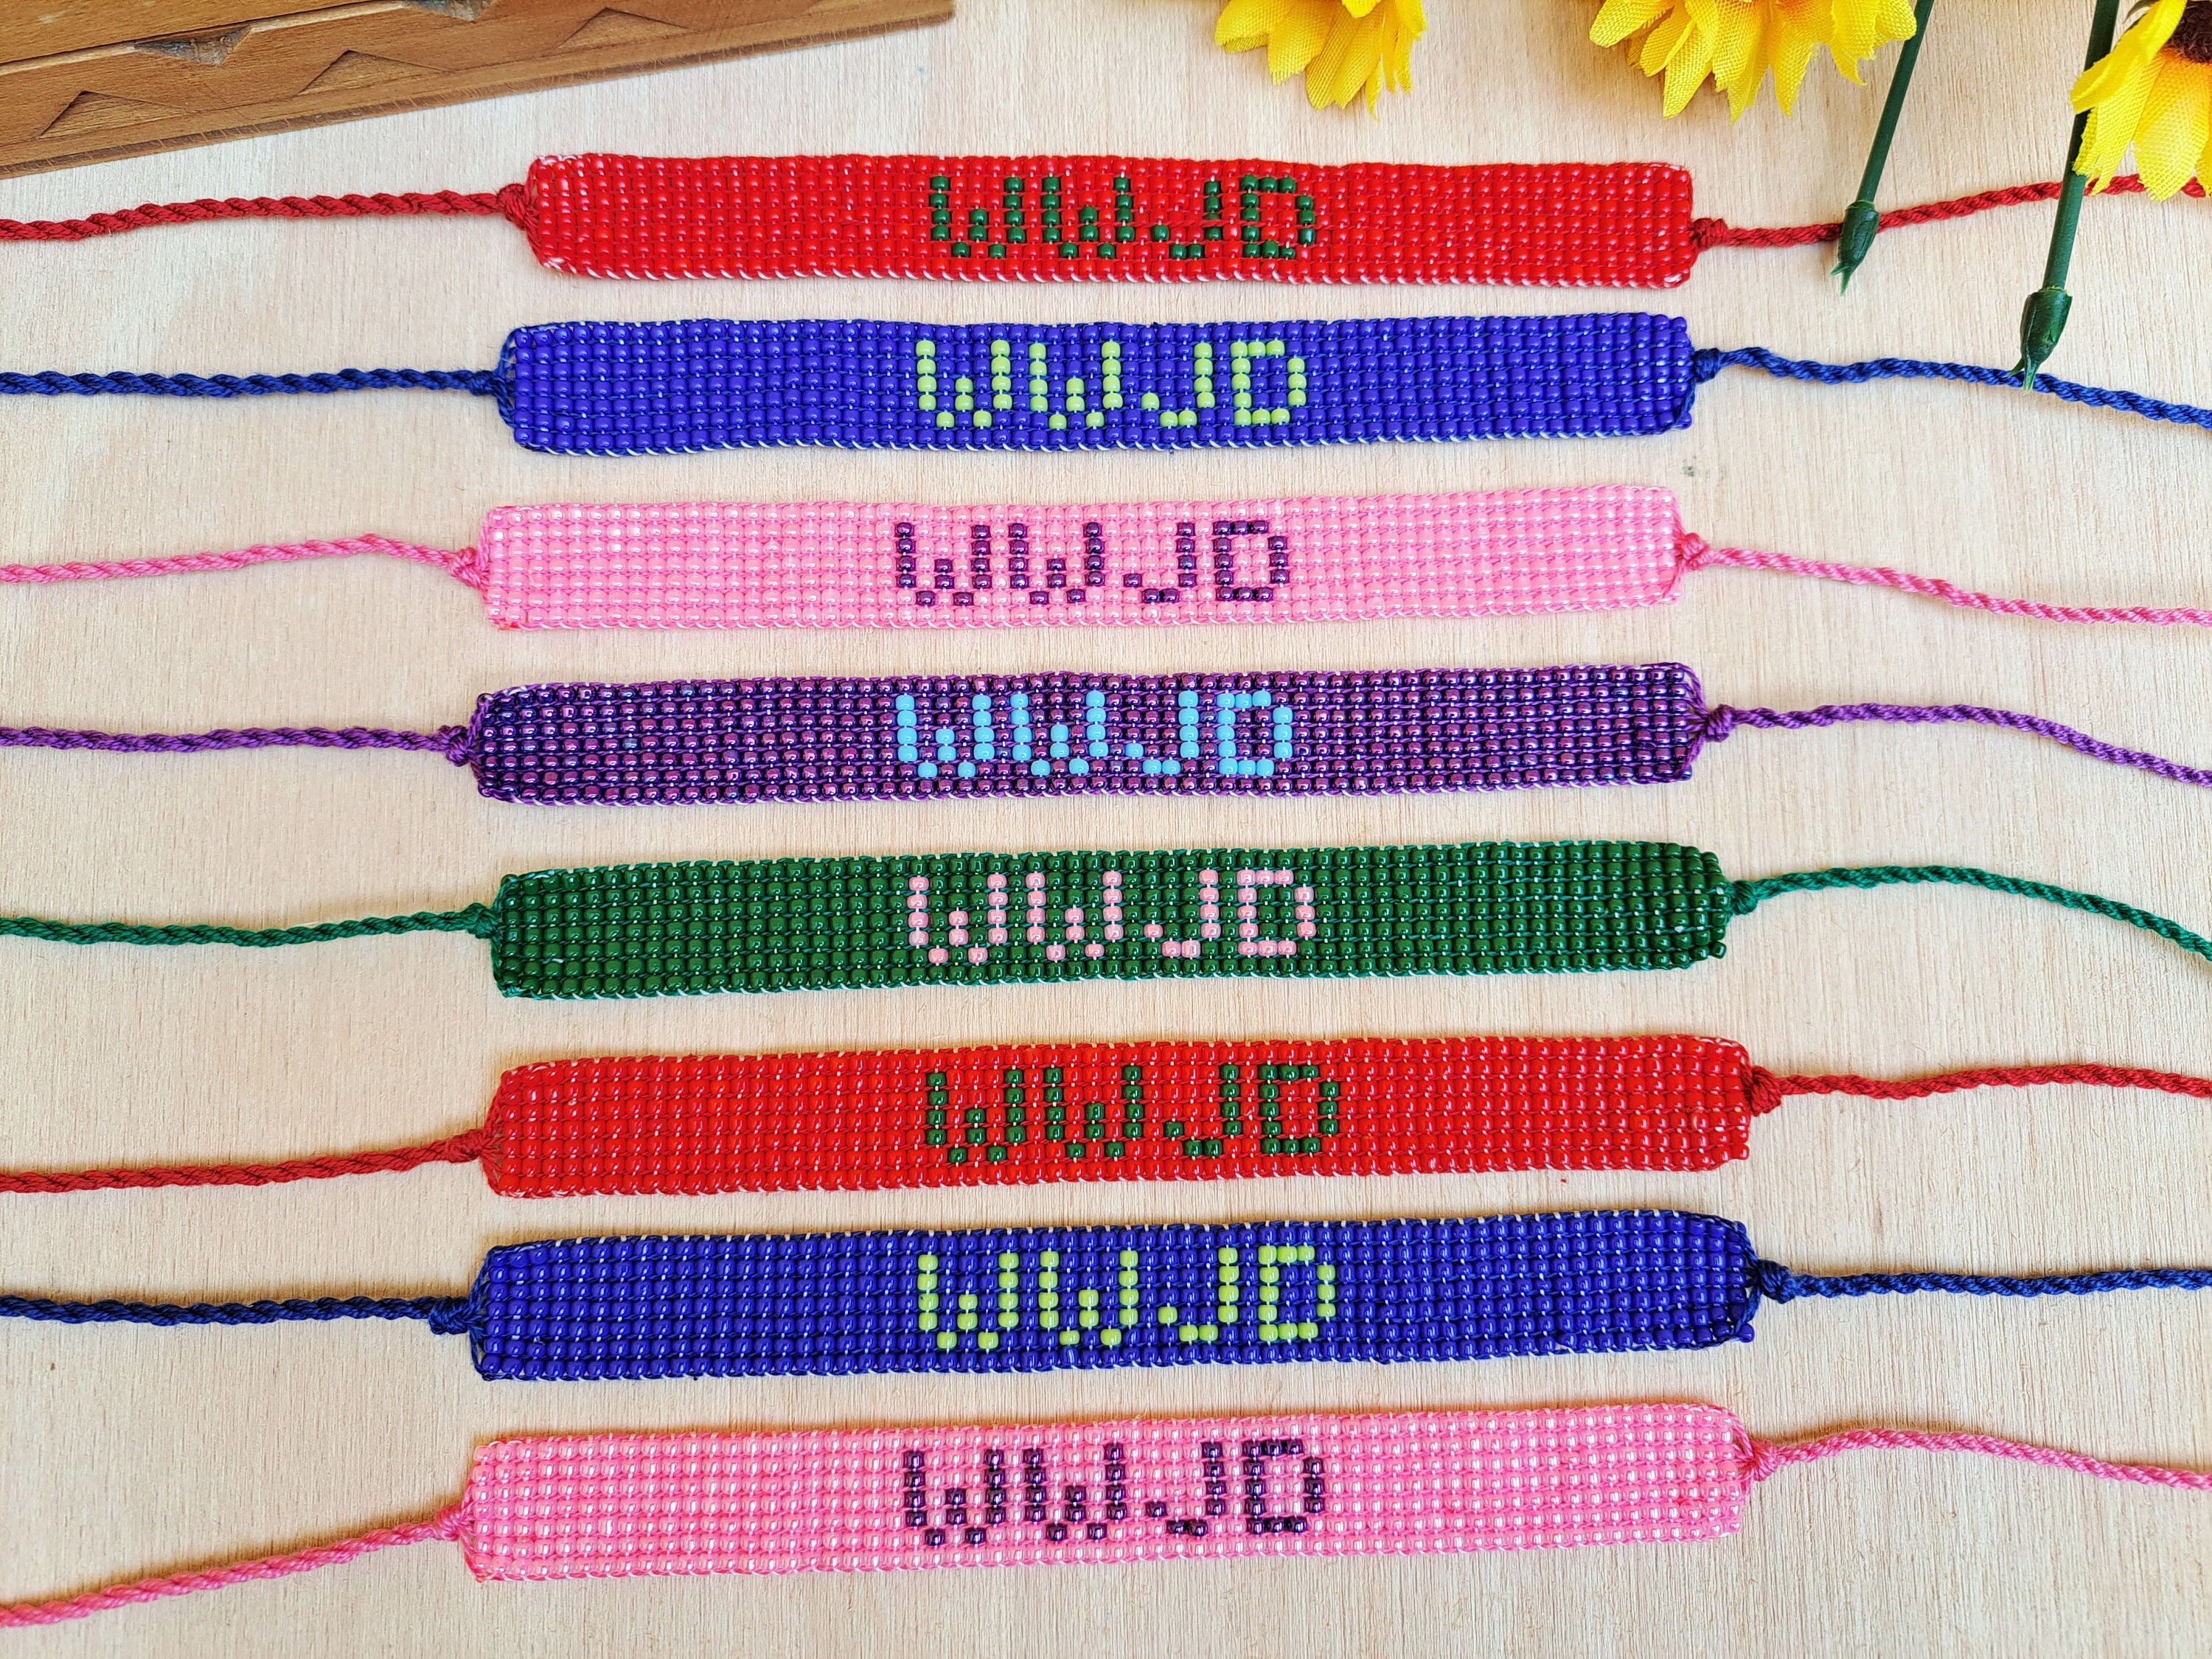 WWJD leather bracelet - Alindrie Creations & Inspirations